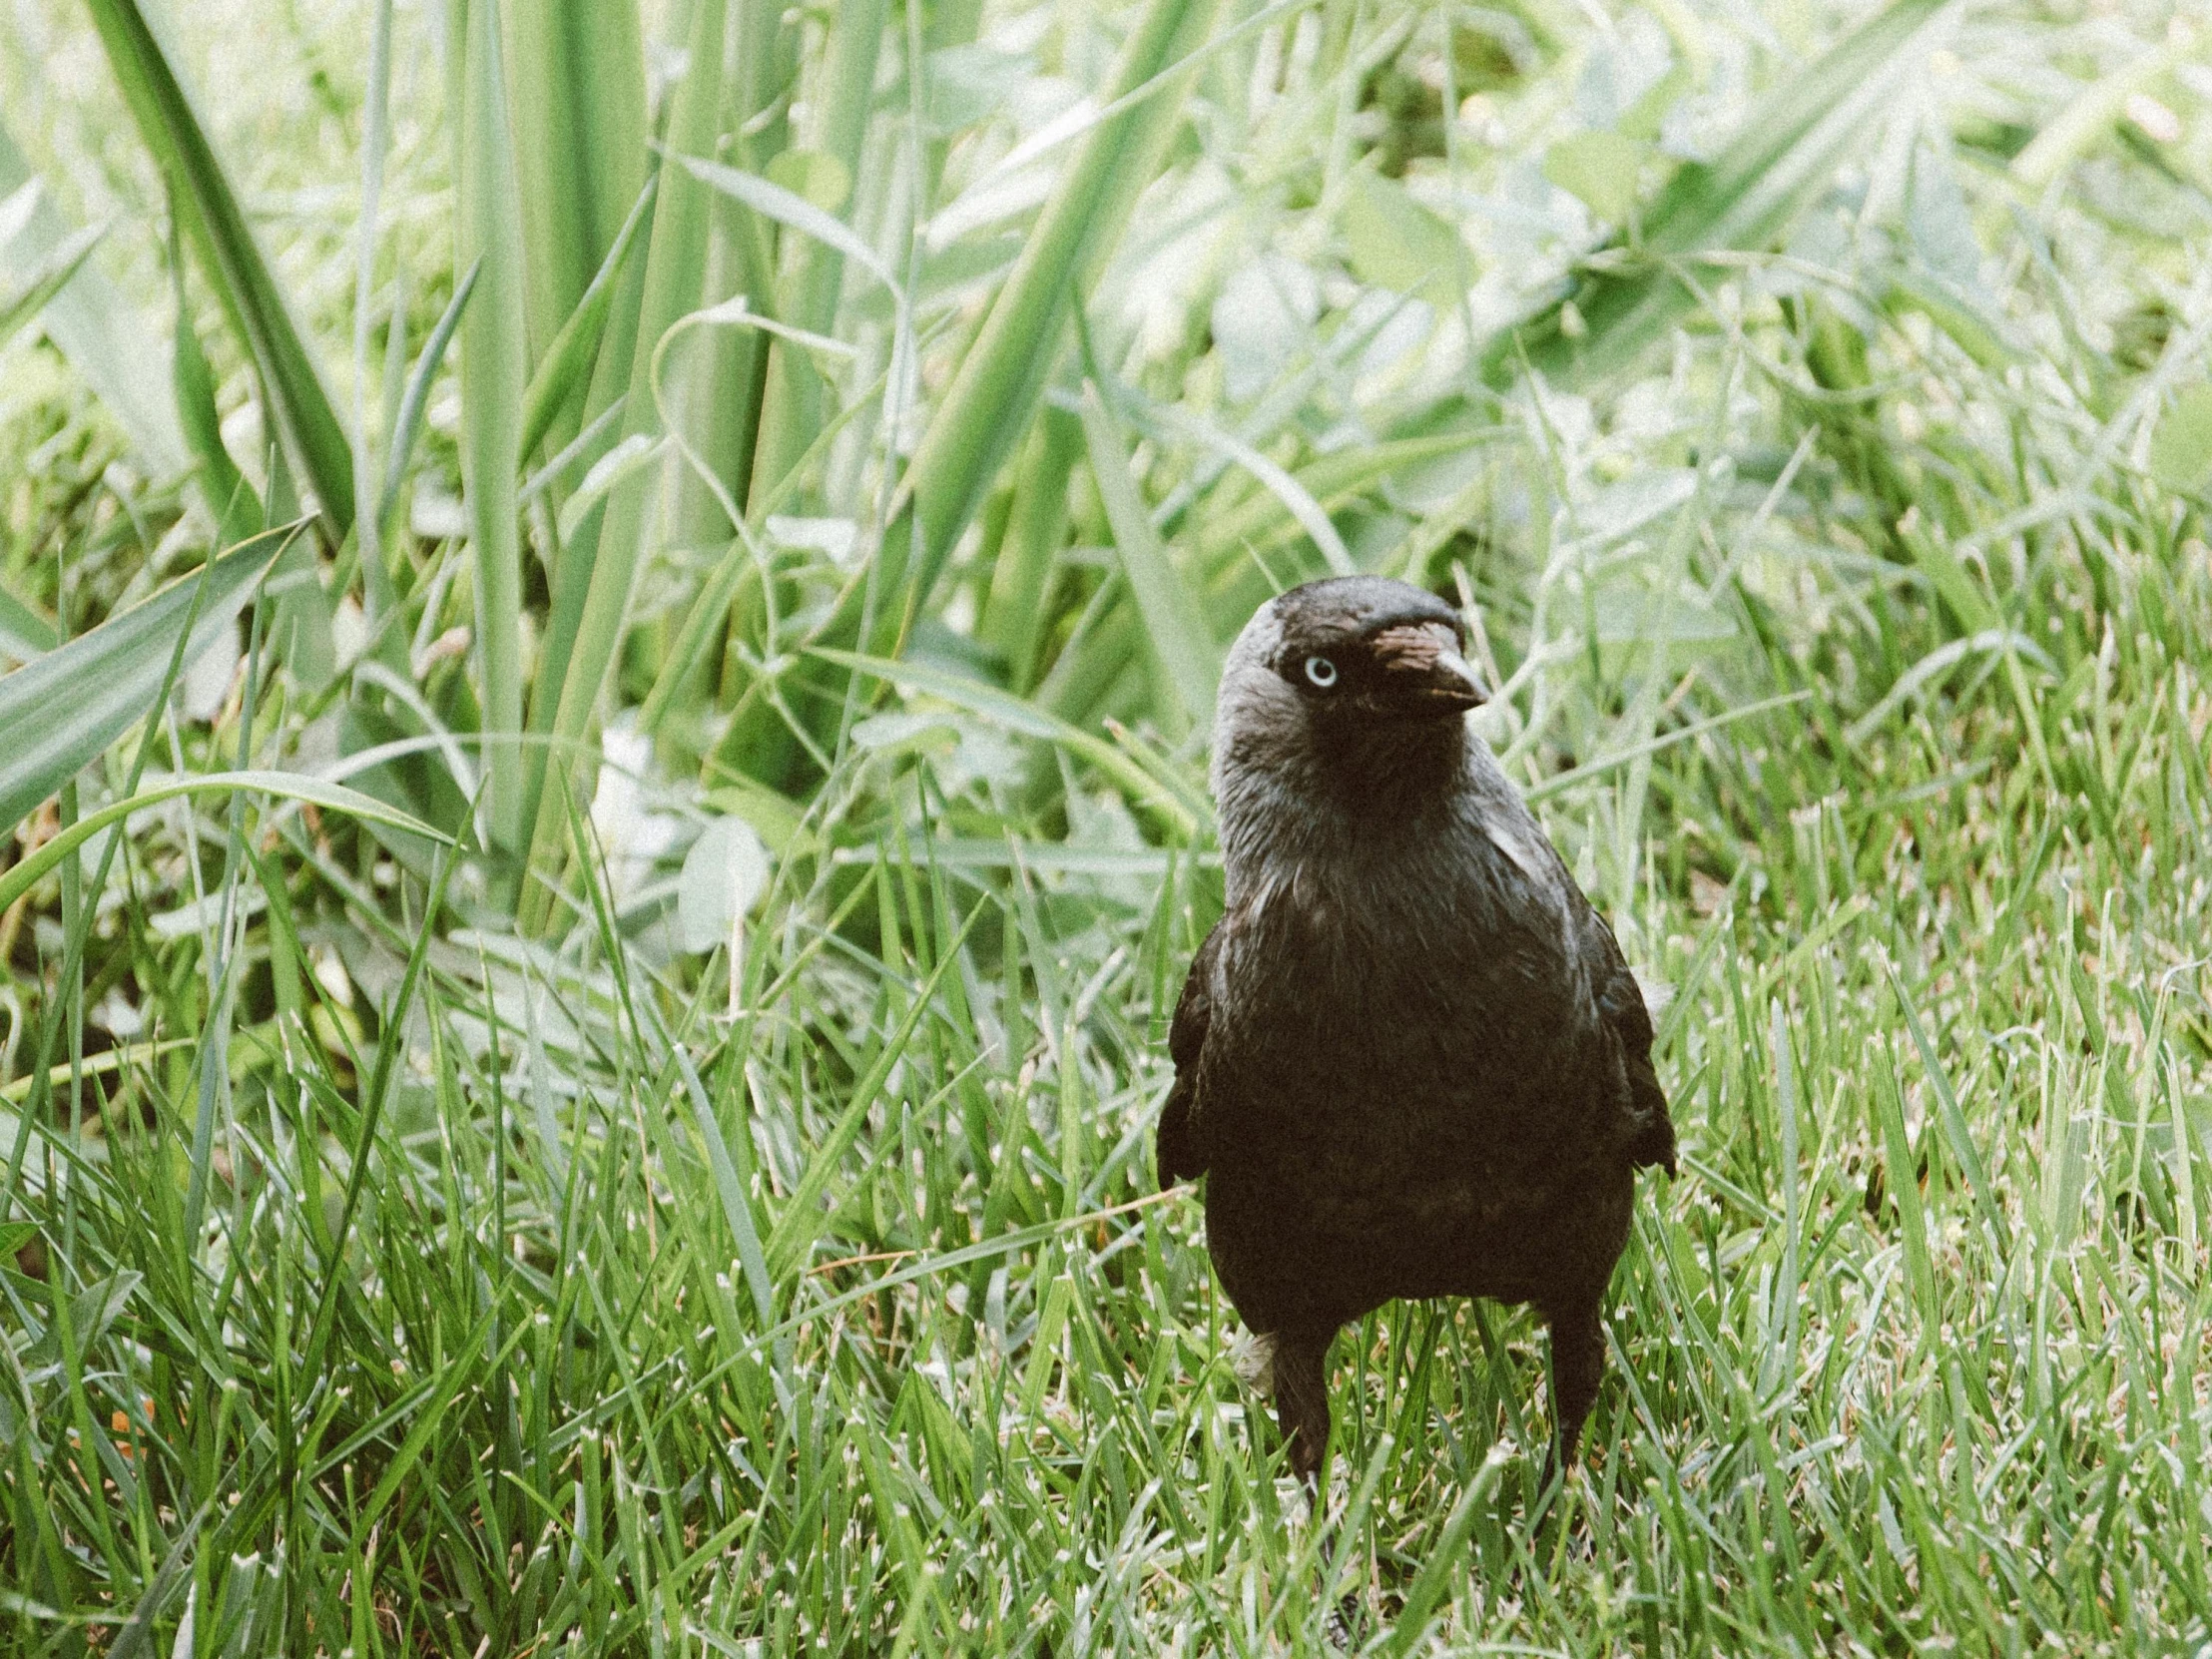 a bird sitting in the grass with its head cocked